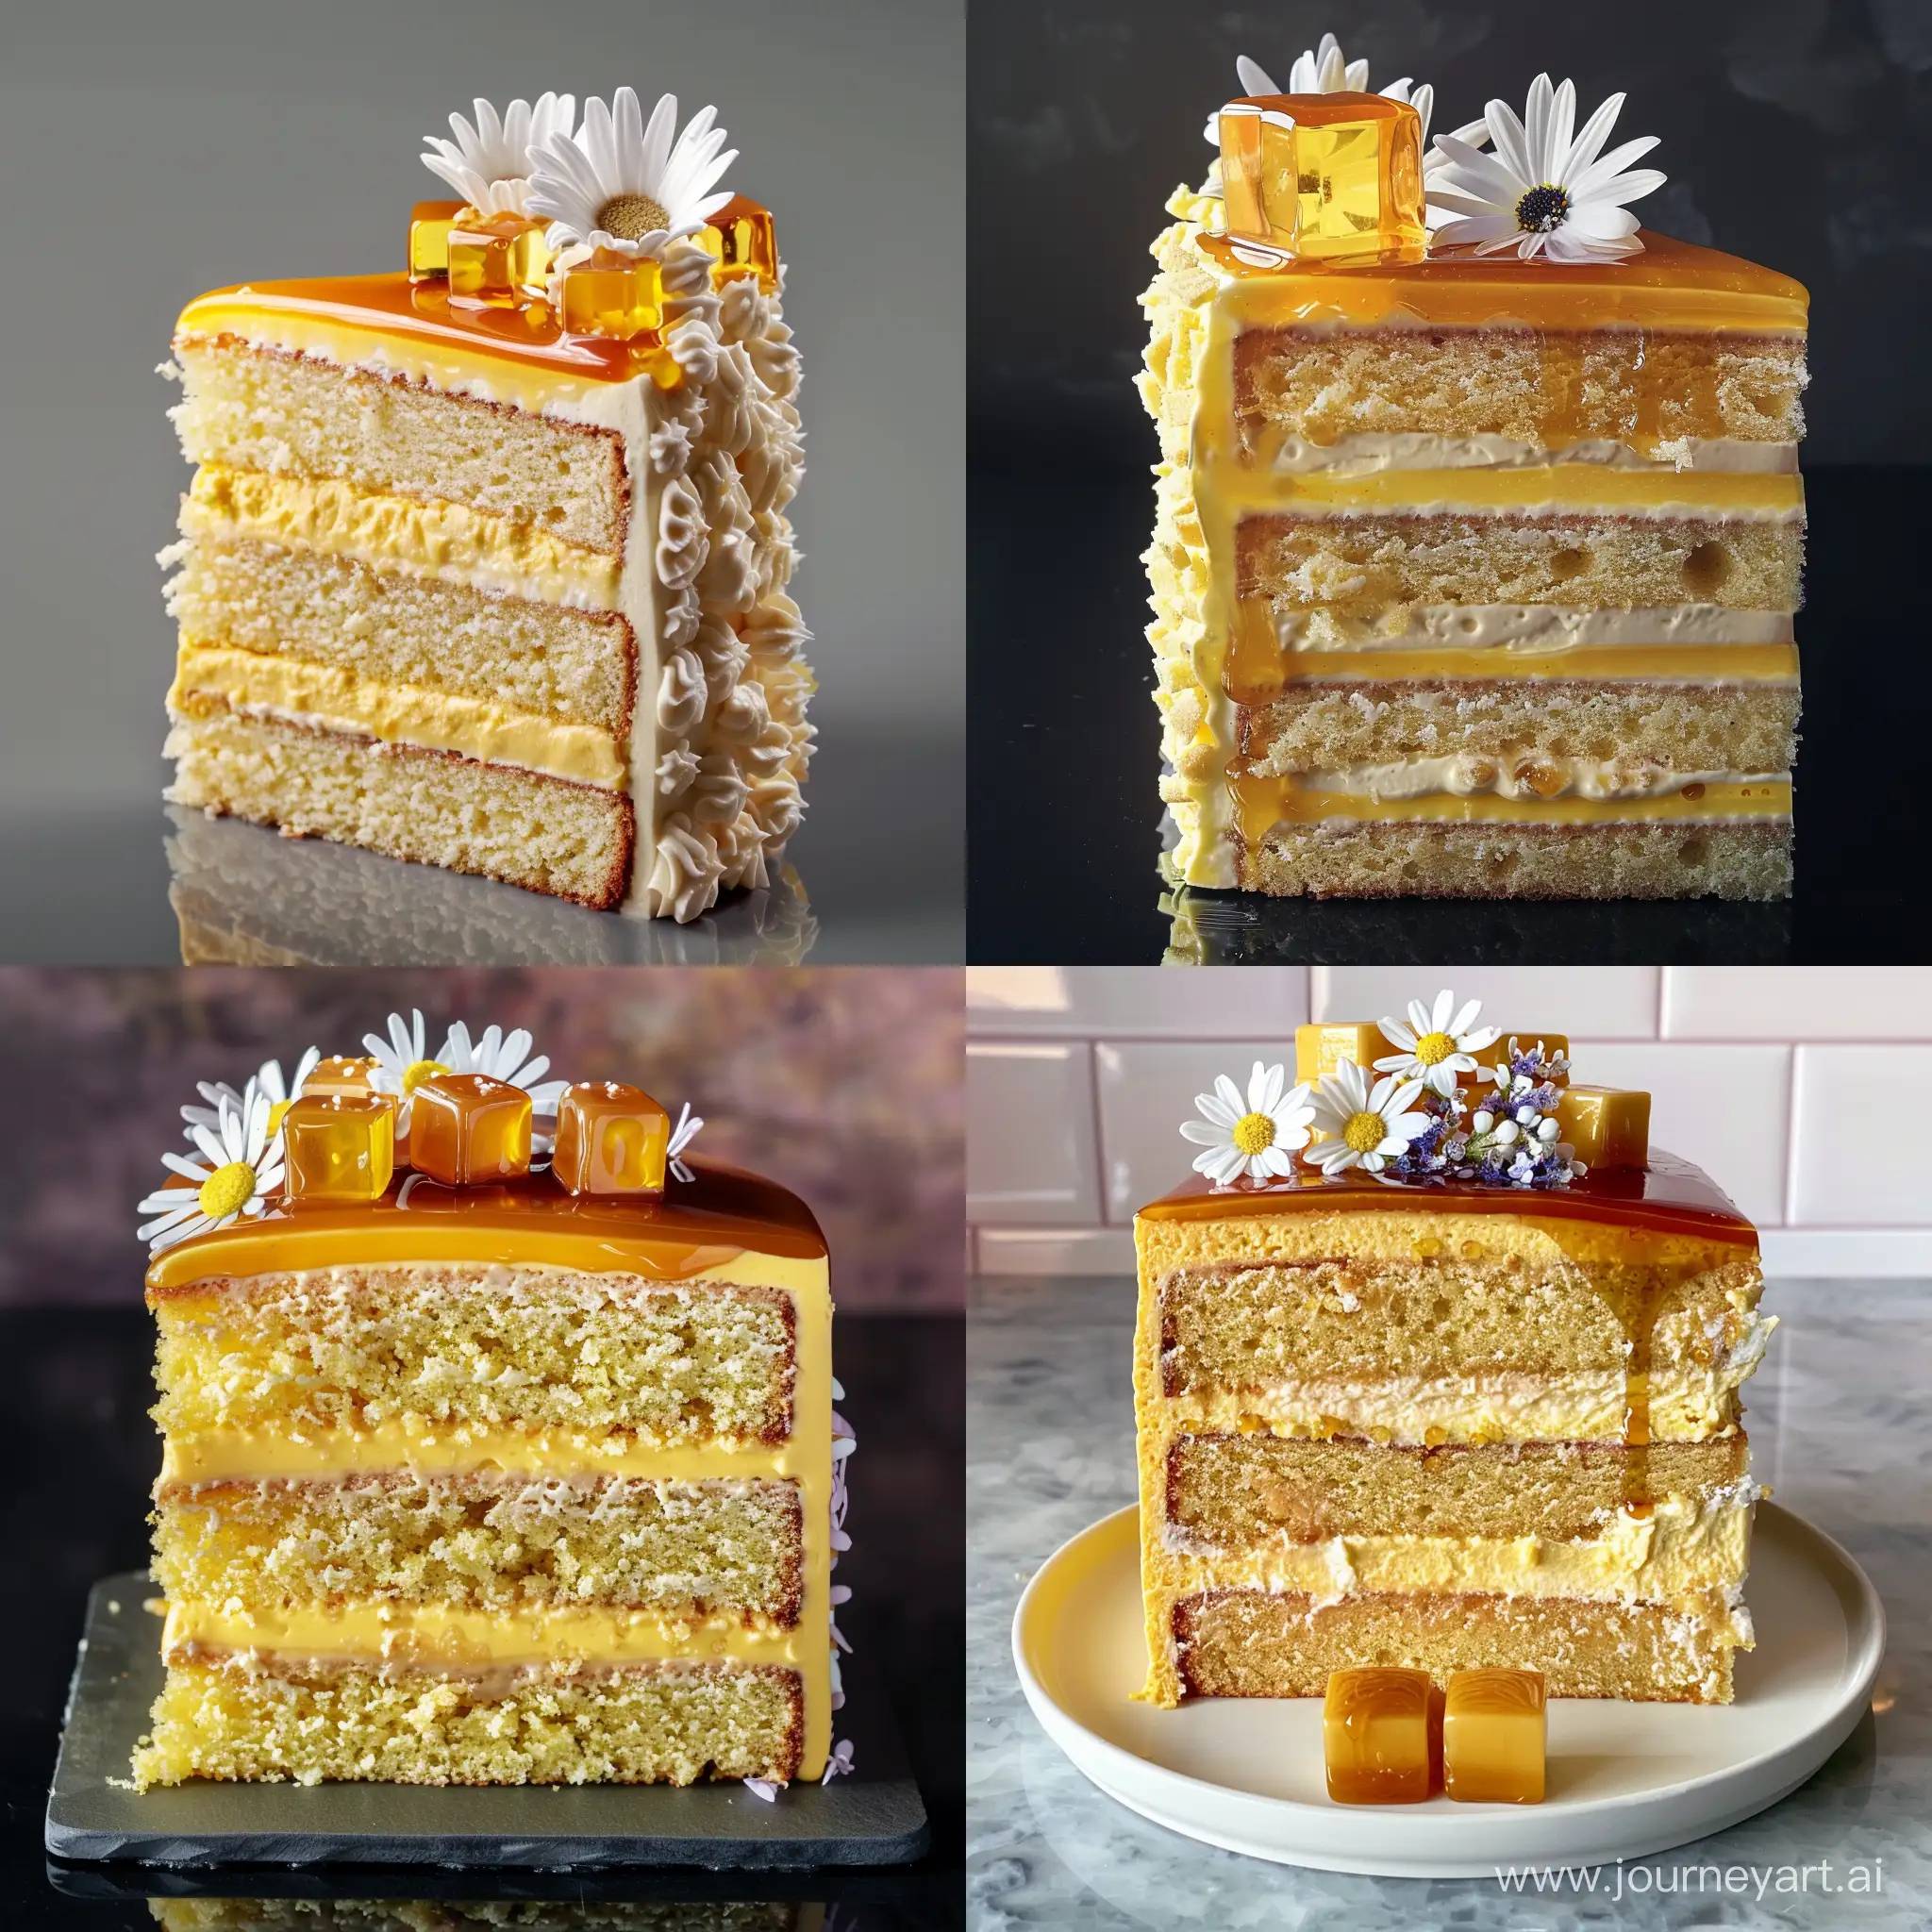 Decadent-Layered-Yellow-Cake-with-Caramel-Cubes-and-Golden-Syrup-Drizzle